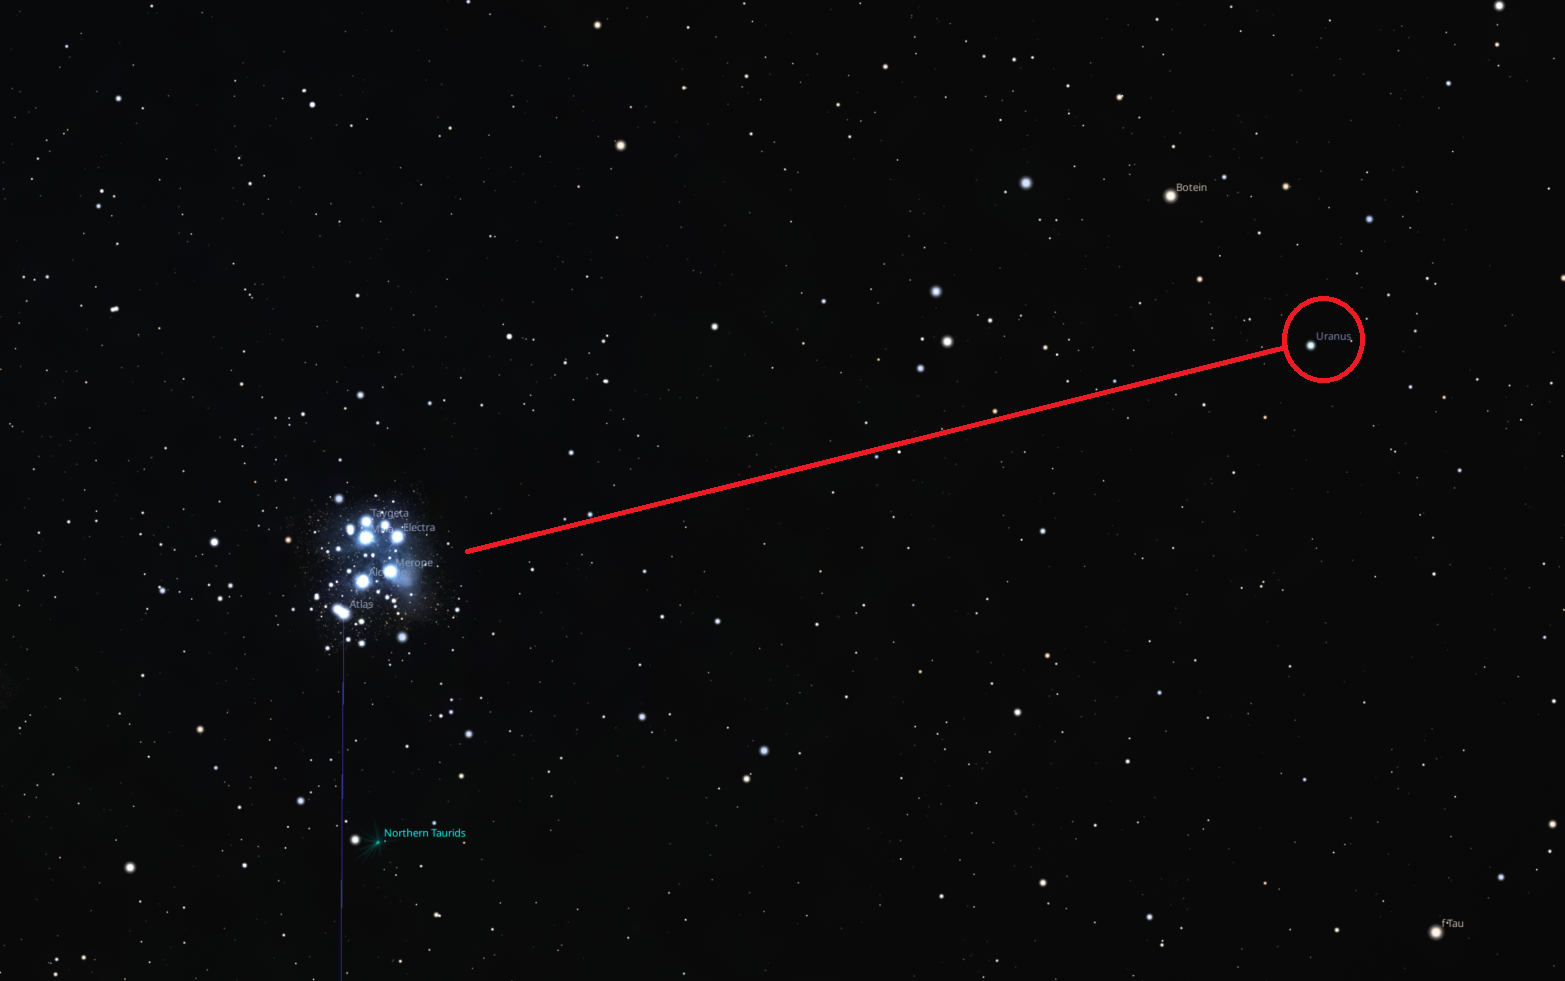 A star map showing The Pleiades and Uranus. A red line is linked between showing the distance between the two objects, with Uranus circled in red.